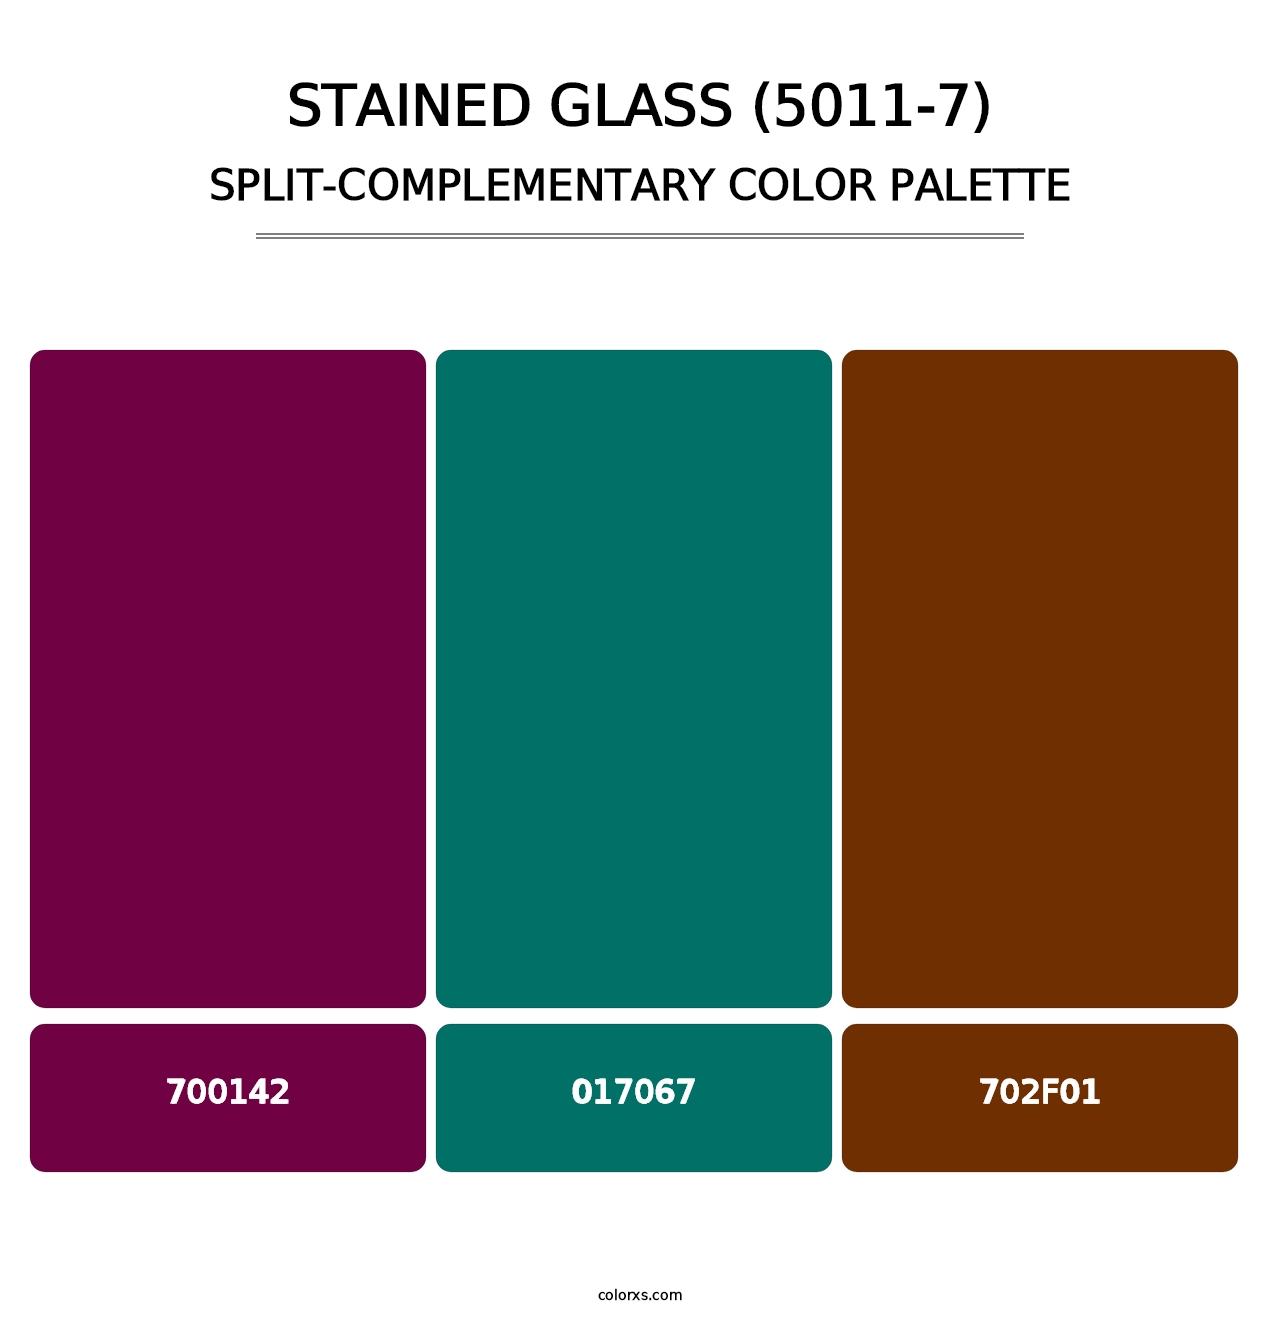 Stained Glass (5011-7) - Split-Complementary Color Palette